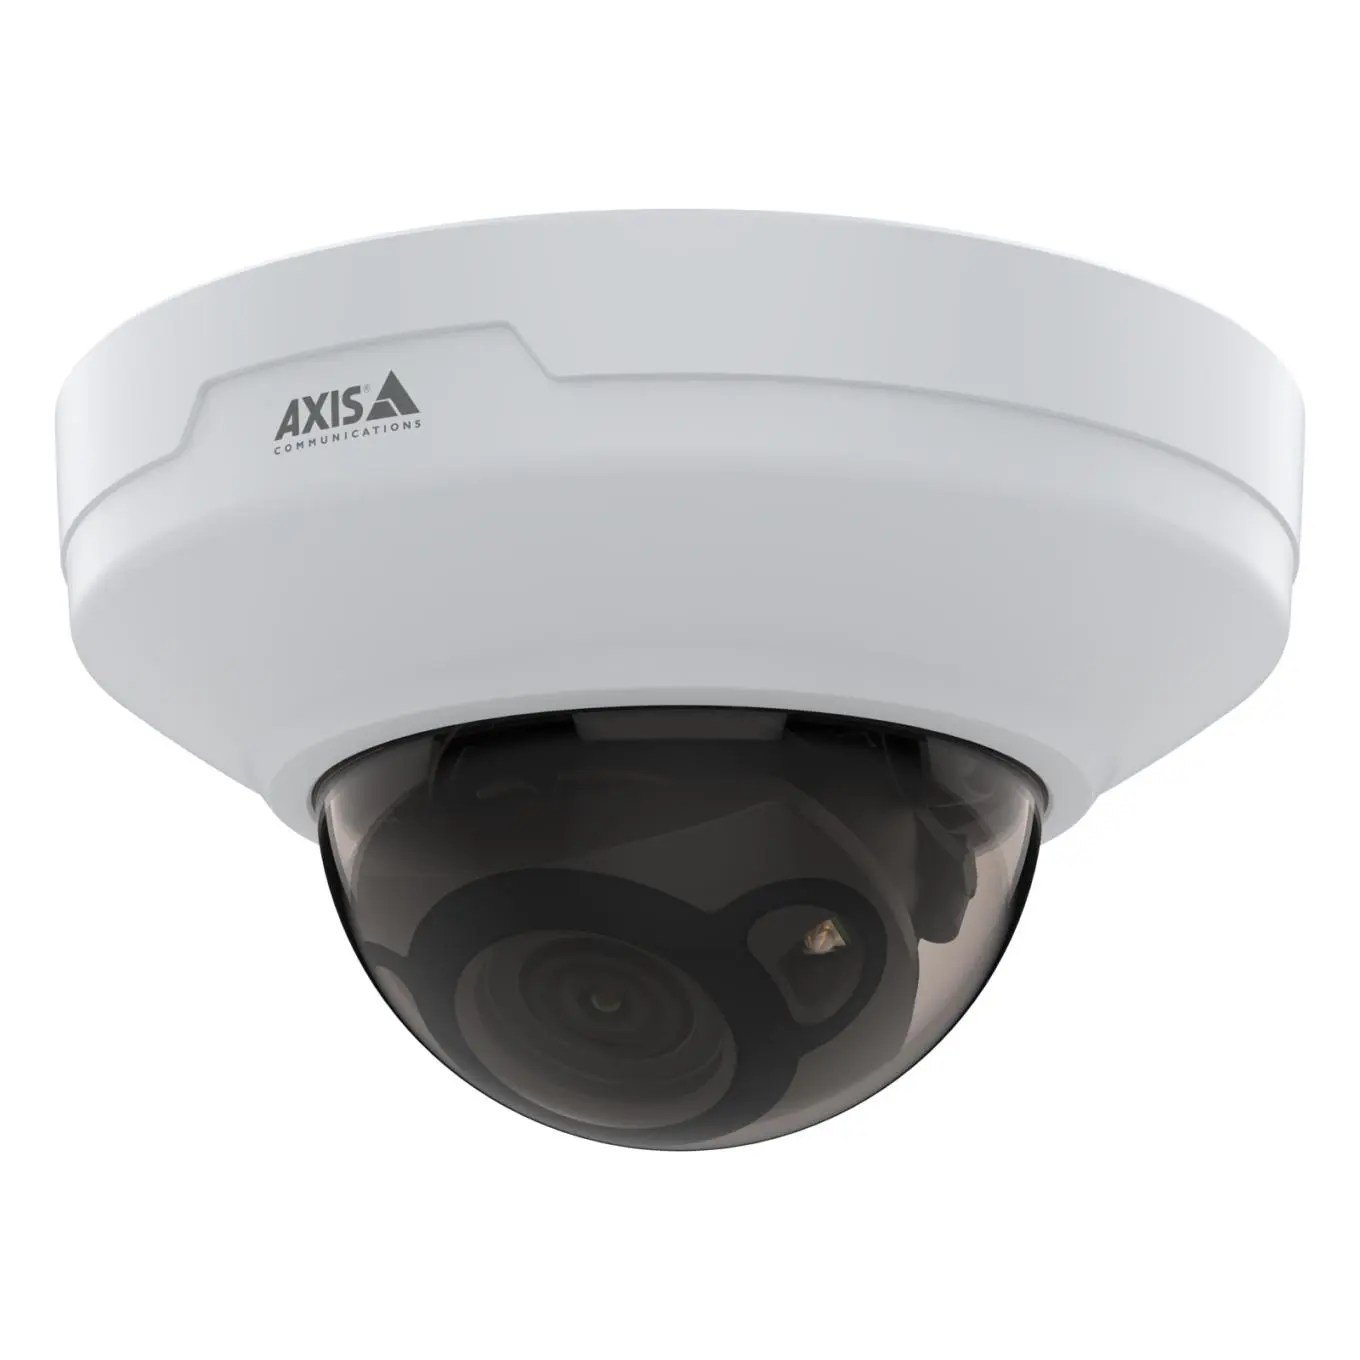 smoked dome camera - What is the purpose of dome camera